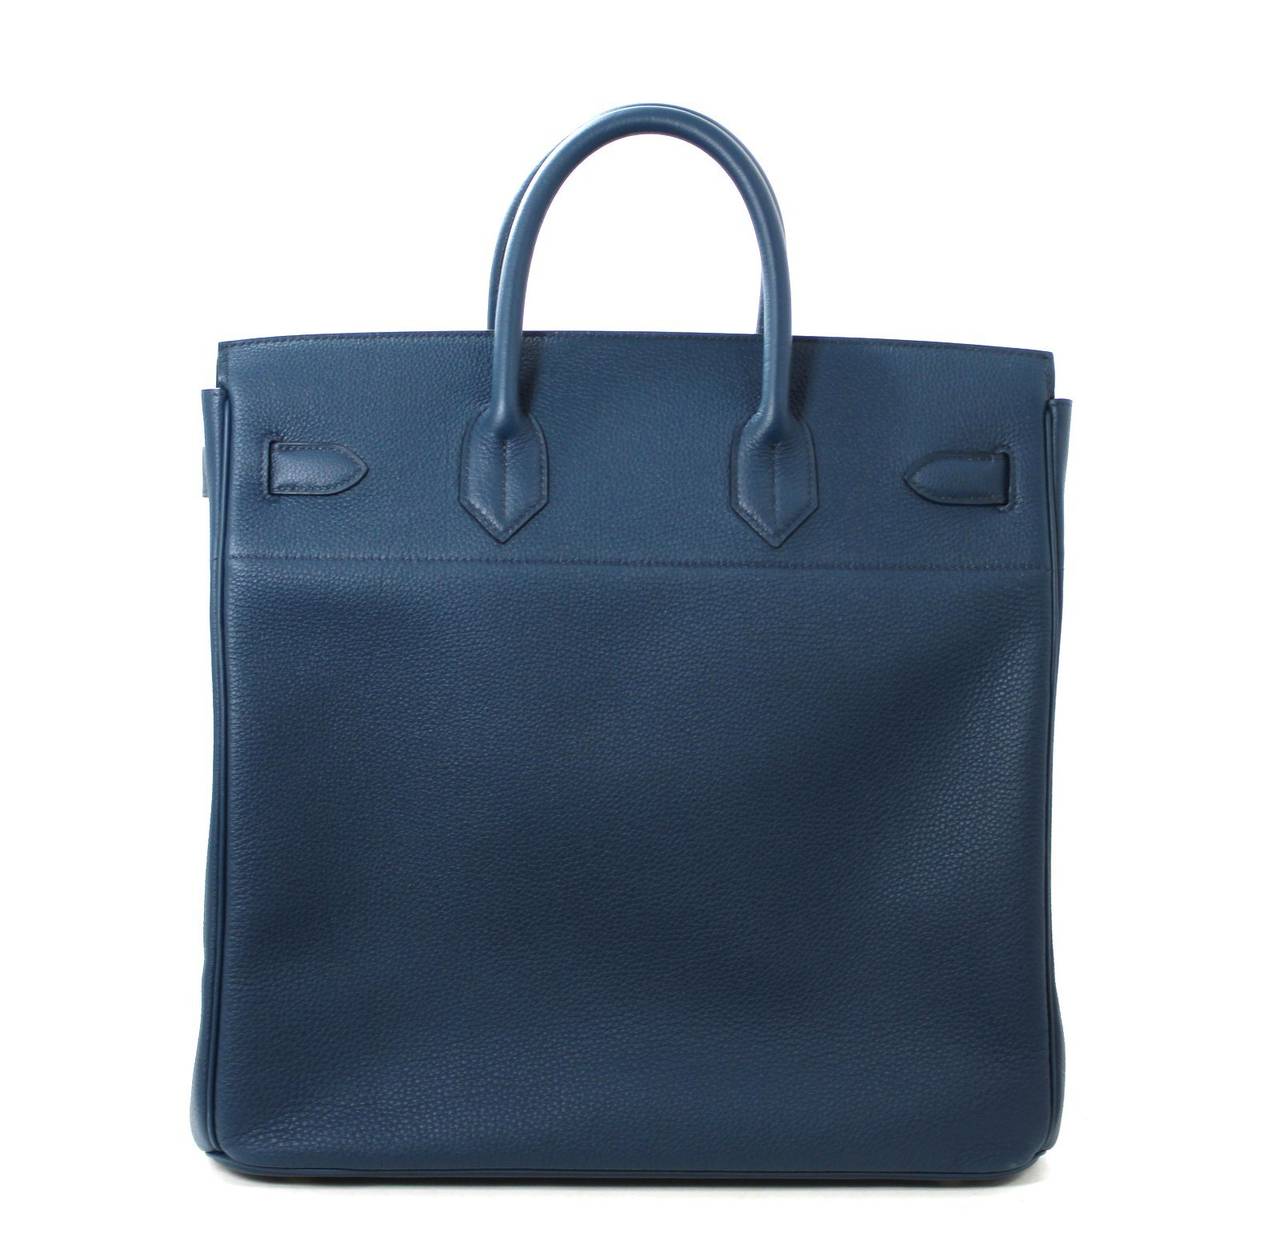 Pristine, store fresh condition (plastic on hardware) Hermès 40 cm Haut a Courroies in Bleu de Prusse Togo Leather with Gold Hardware.   Crafted by hand and considered by many as the epitome of luxury items, the HAC, or “high belts” bag, is